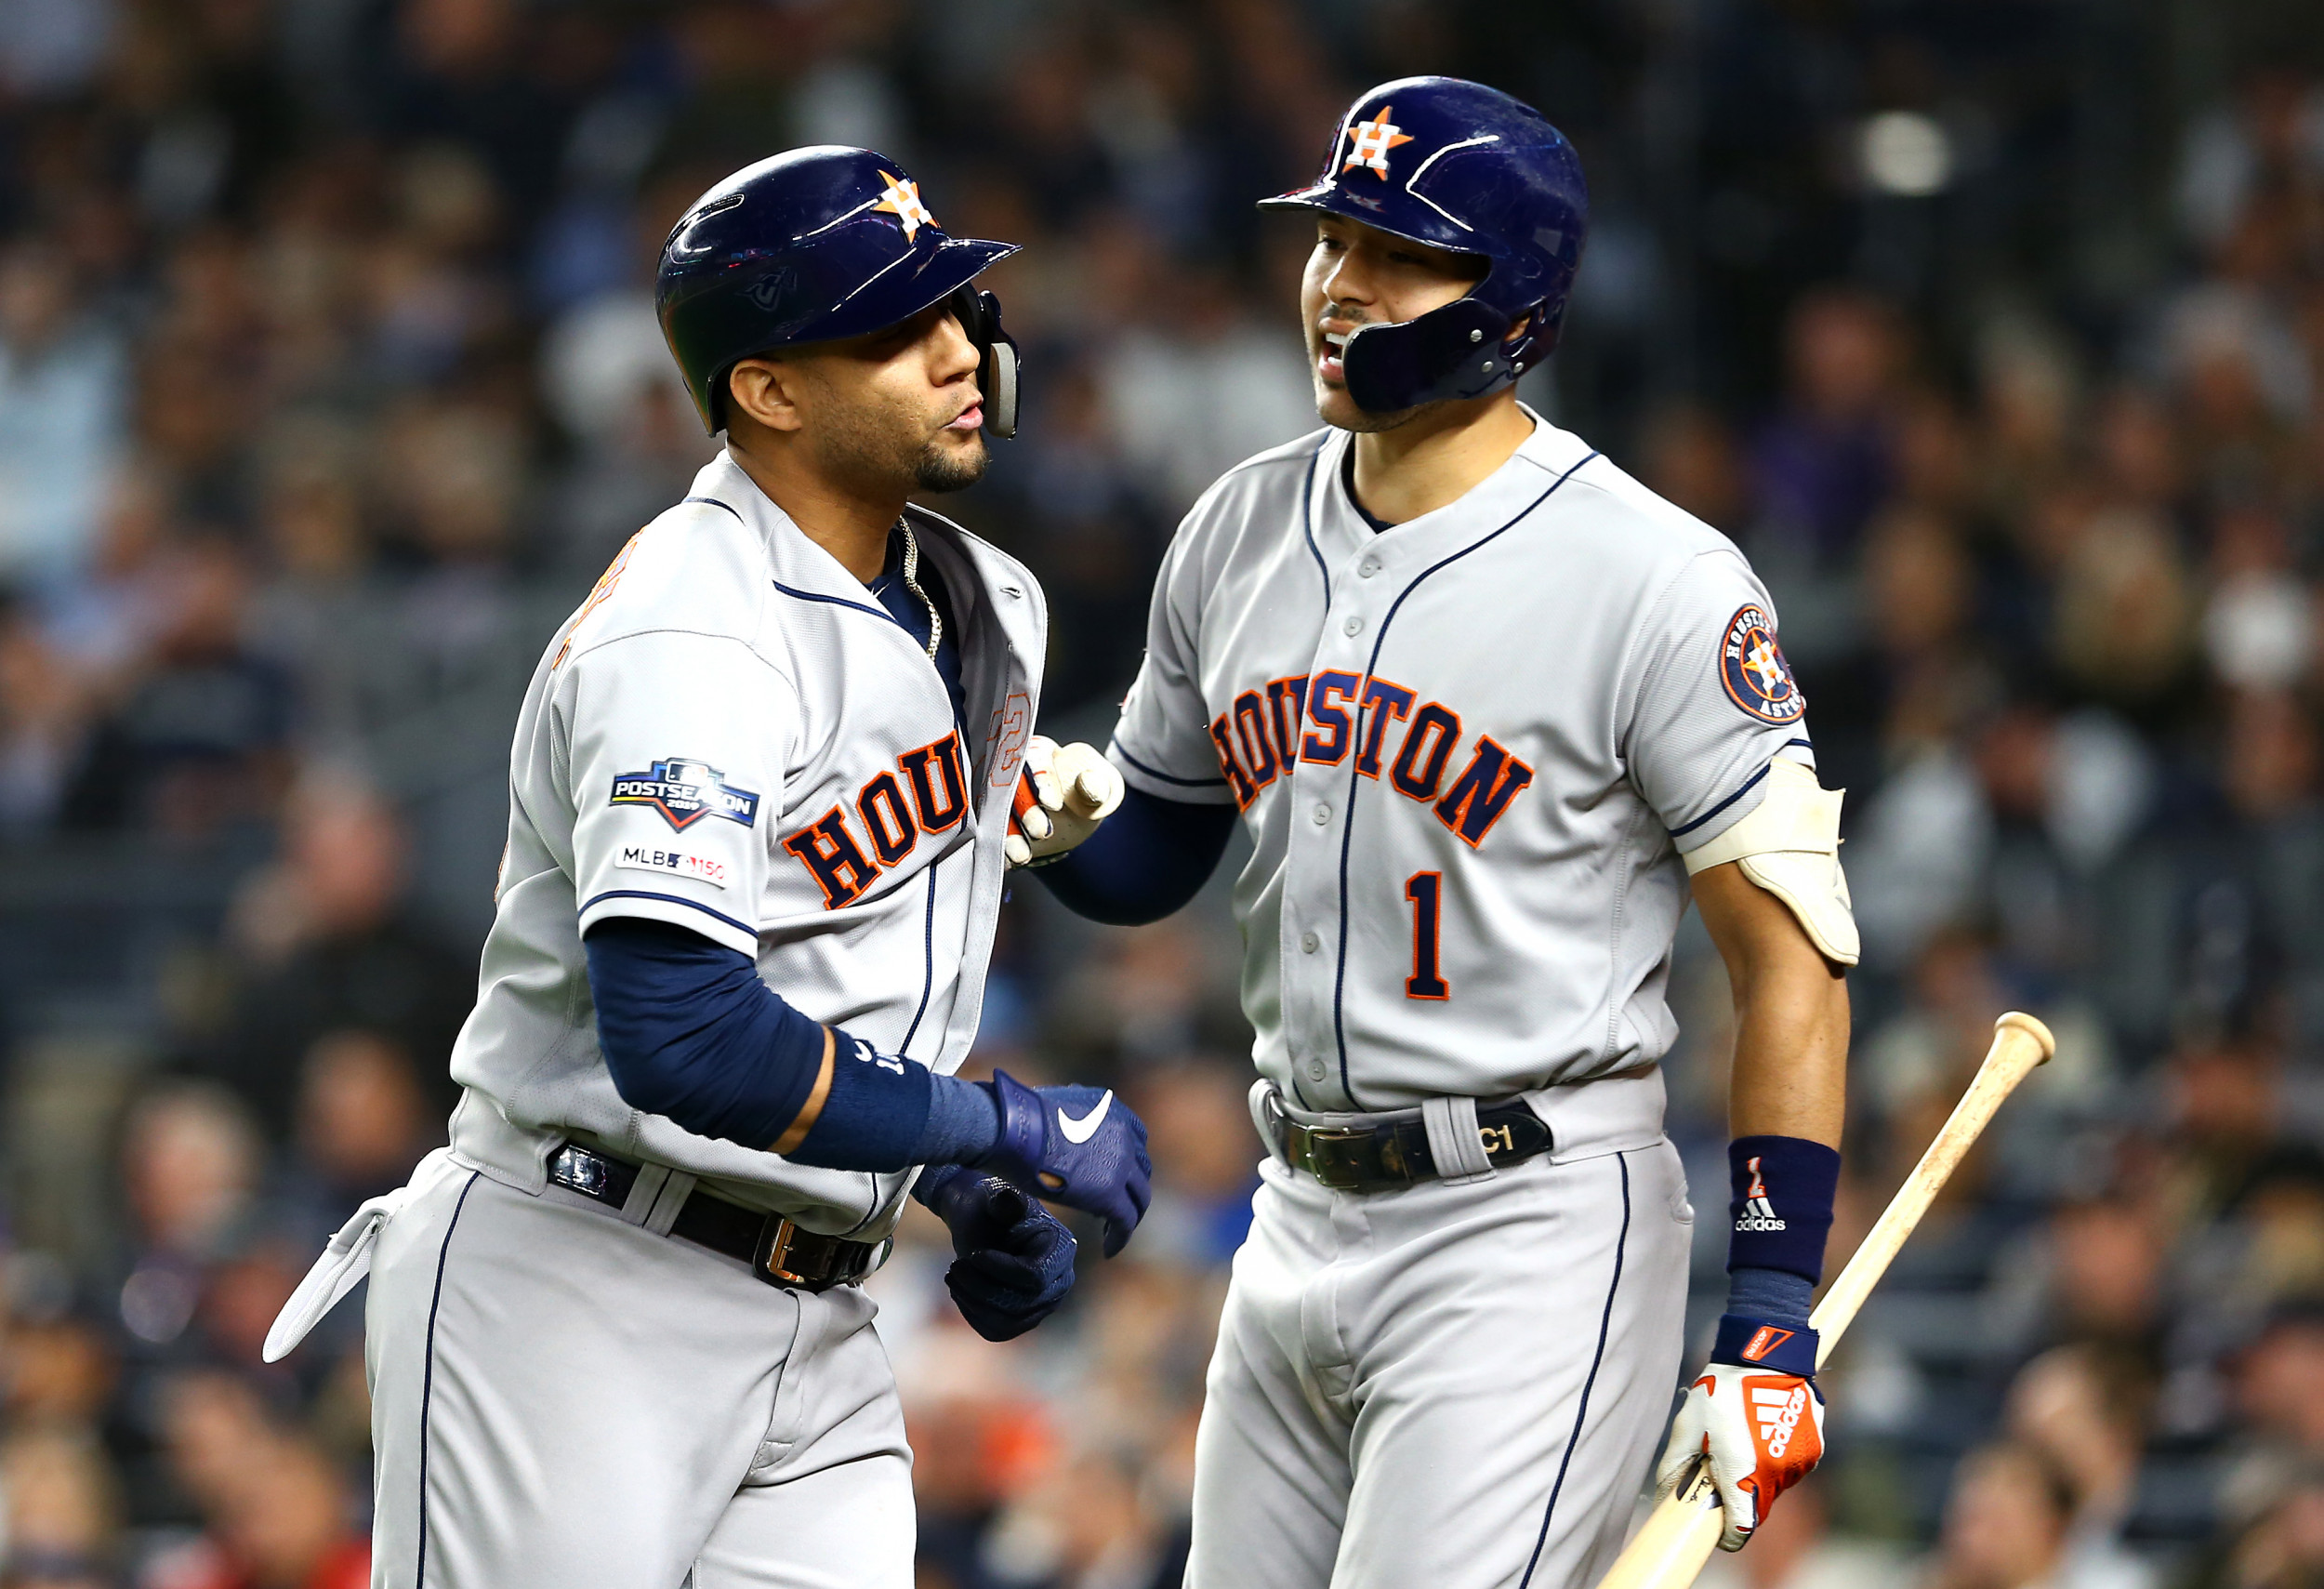 Astros vs. Yankees: Top photos from ALCS Game 4